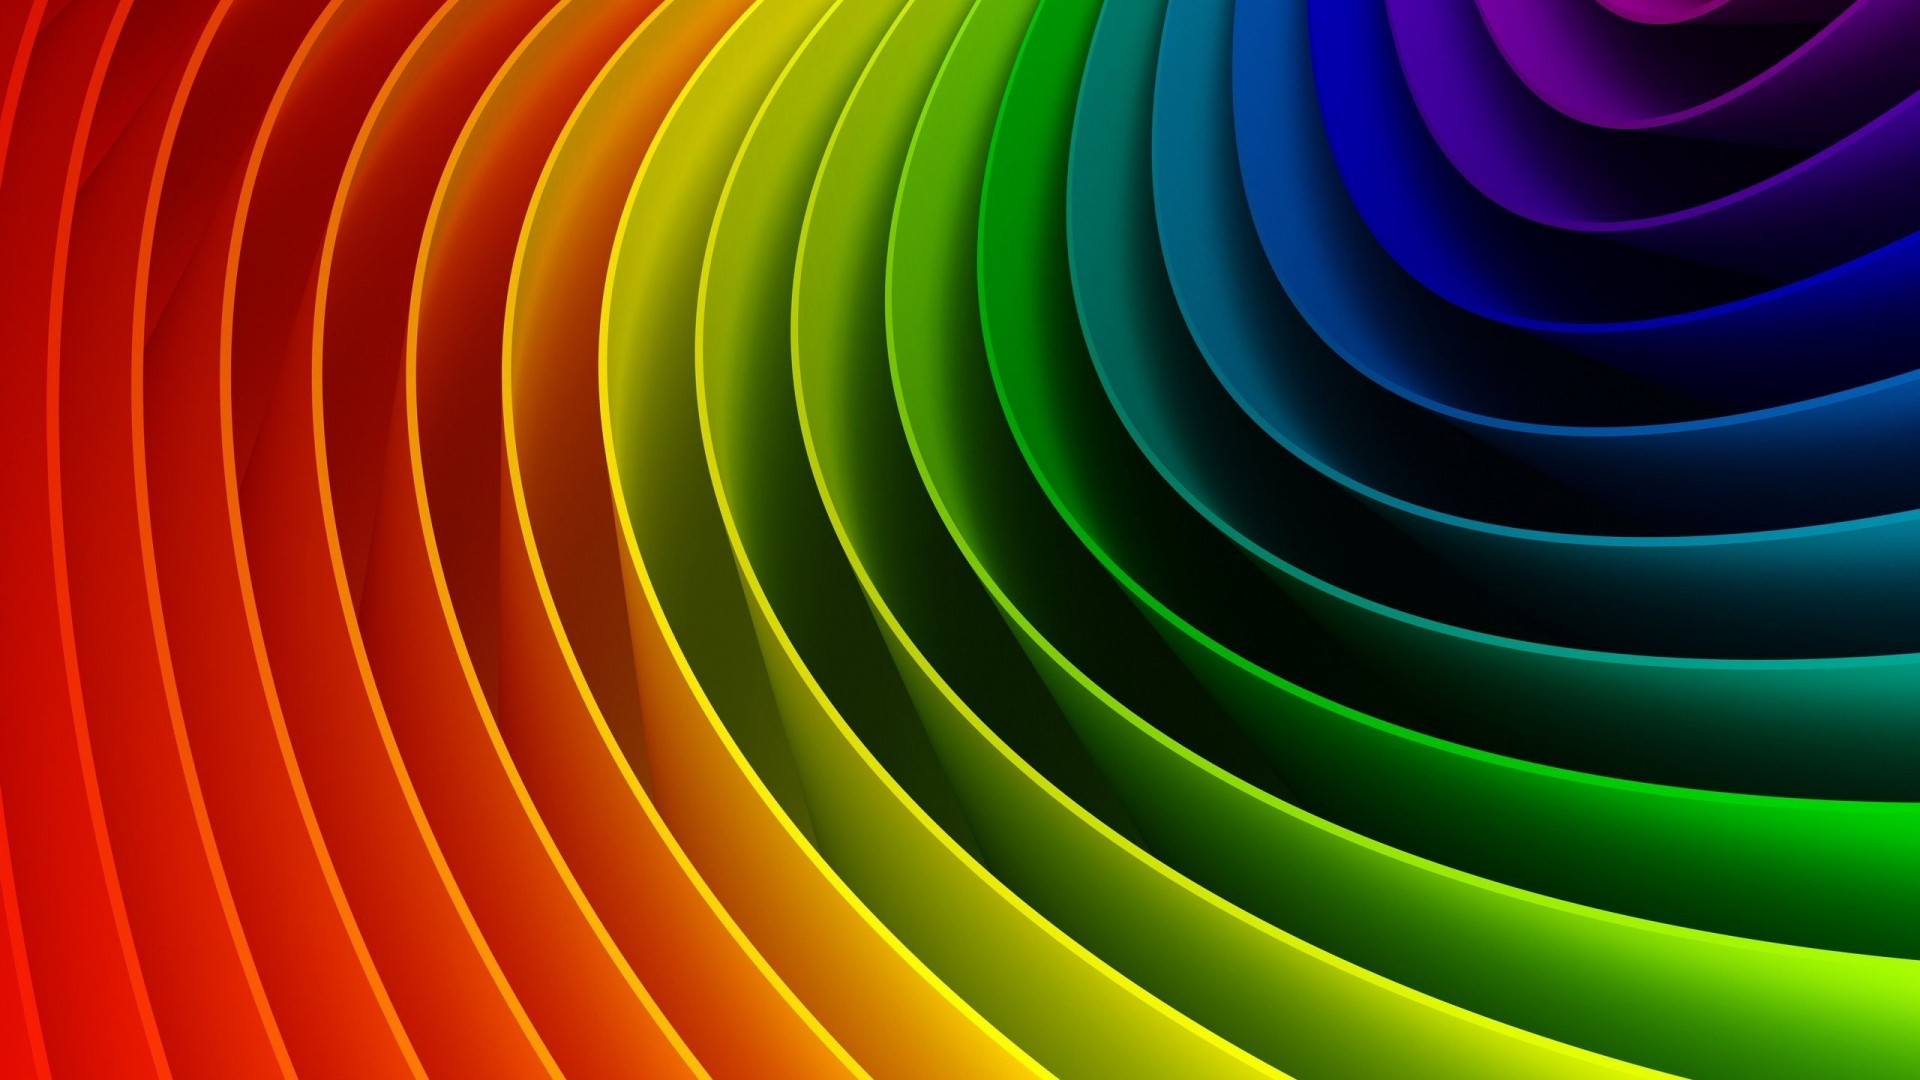 1920x1080 Colorful 3D Computer Background Wallpaper